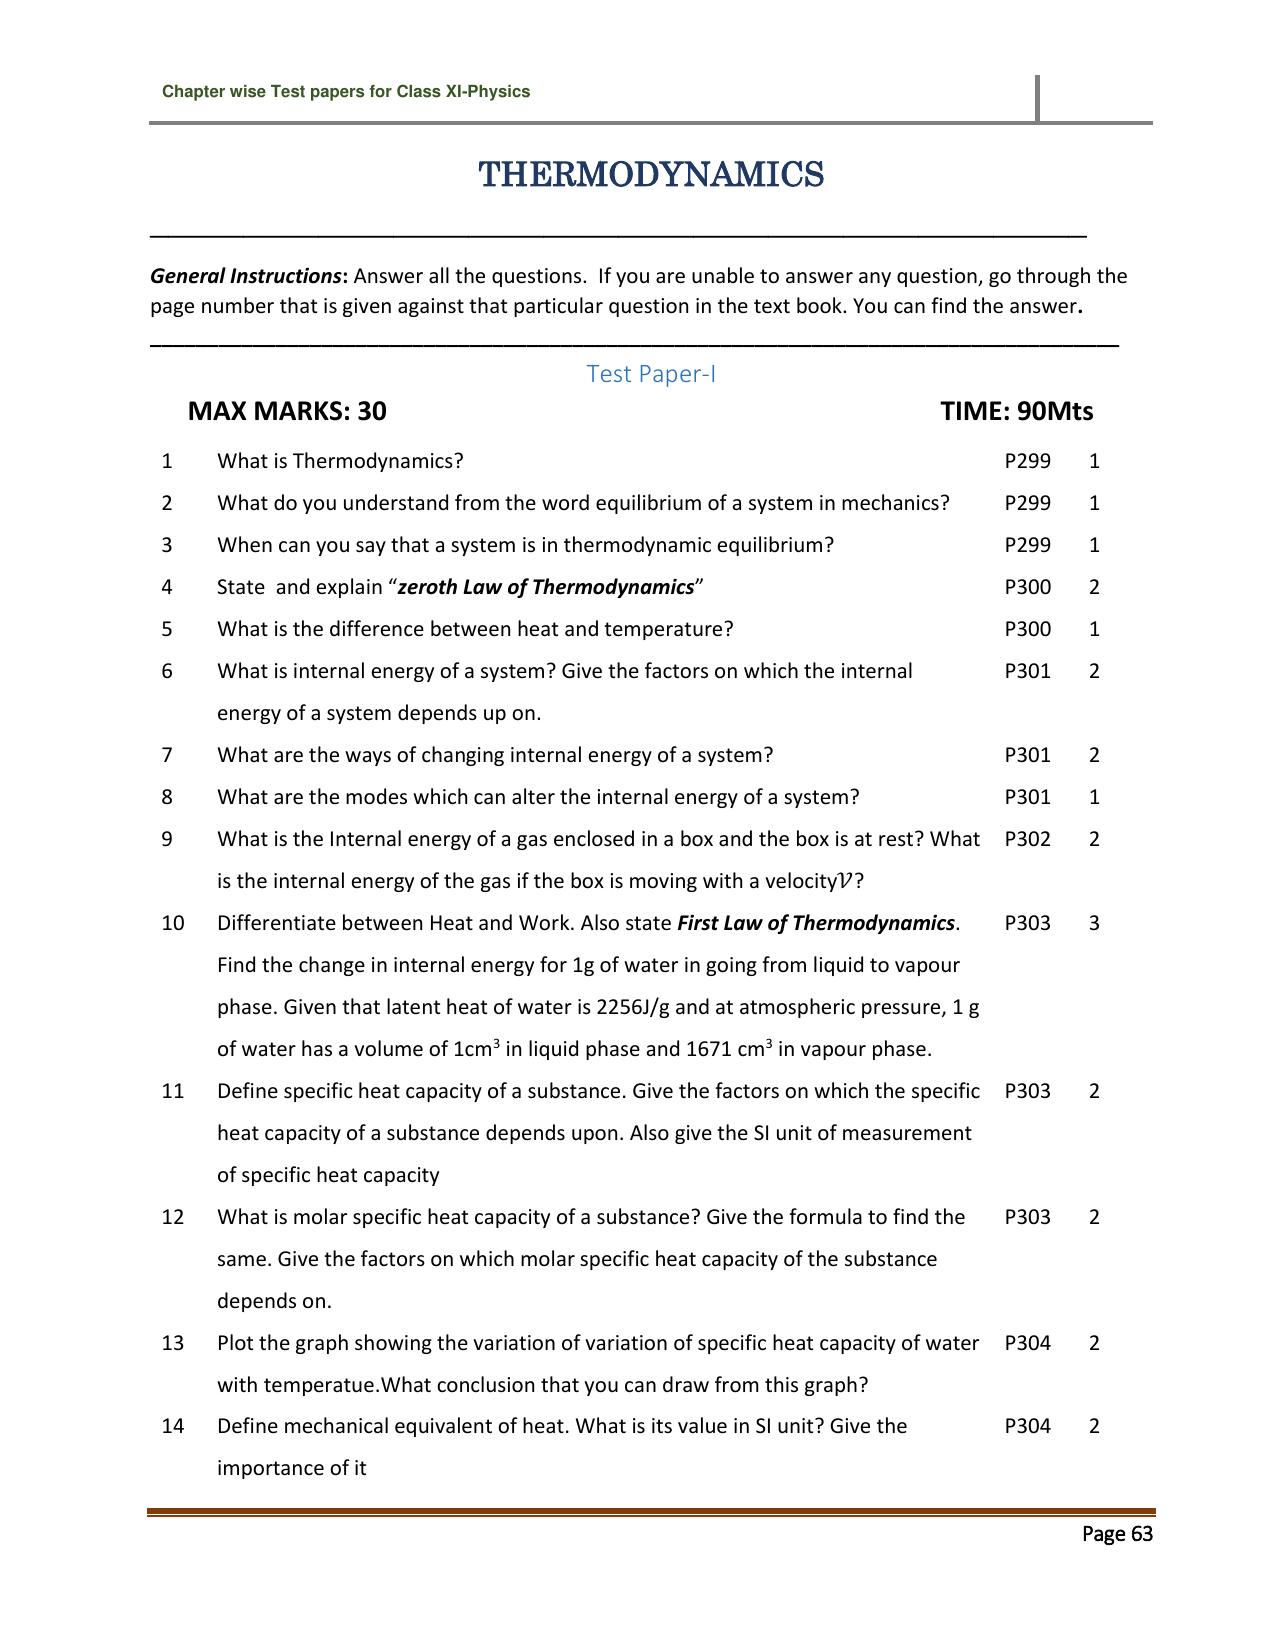 CBSE Worksheets for Class 11 Physics Thermodynamics Assignment 1 - Page 1